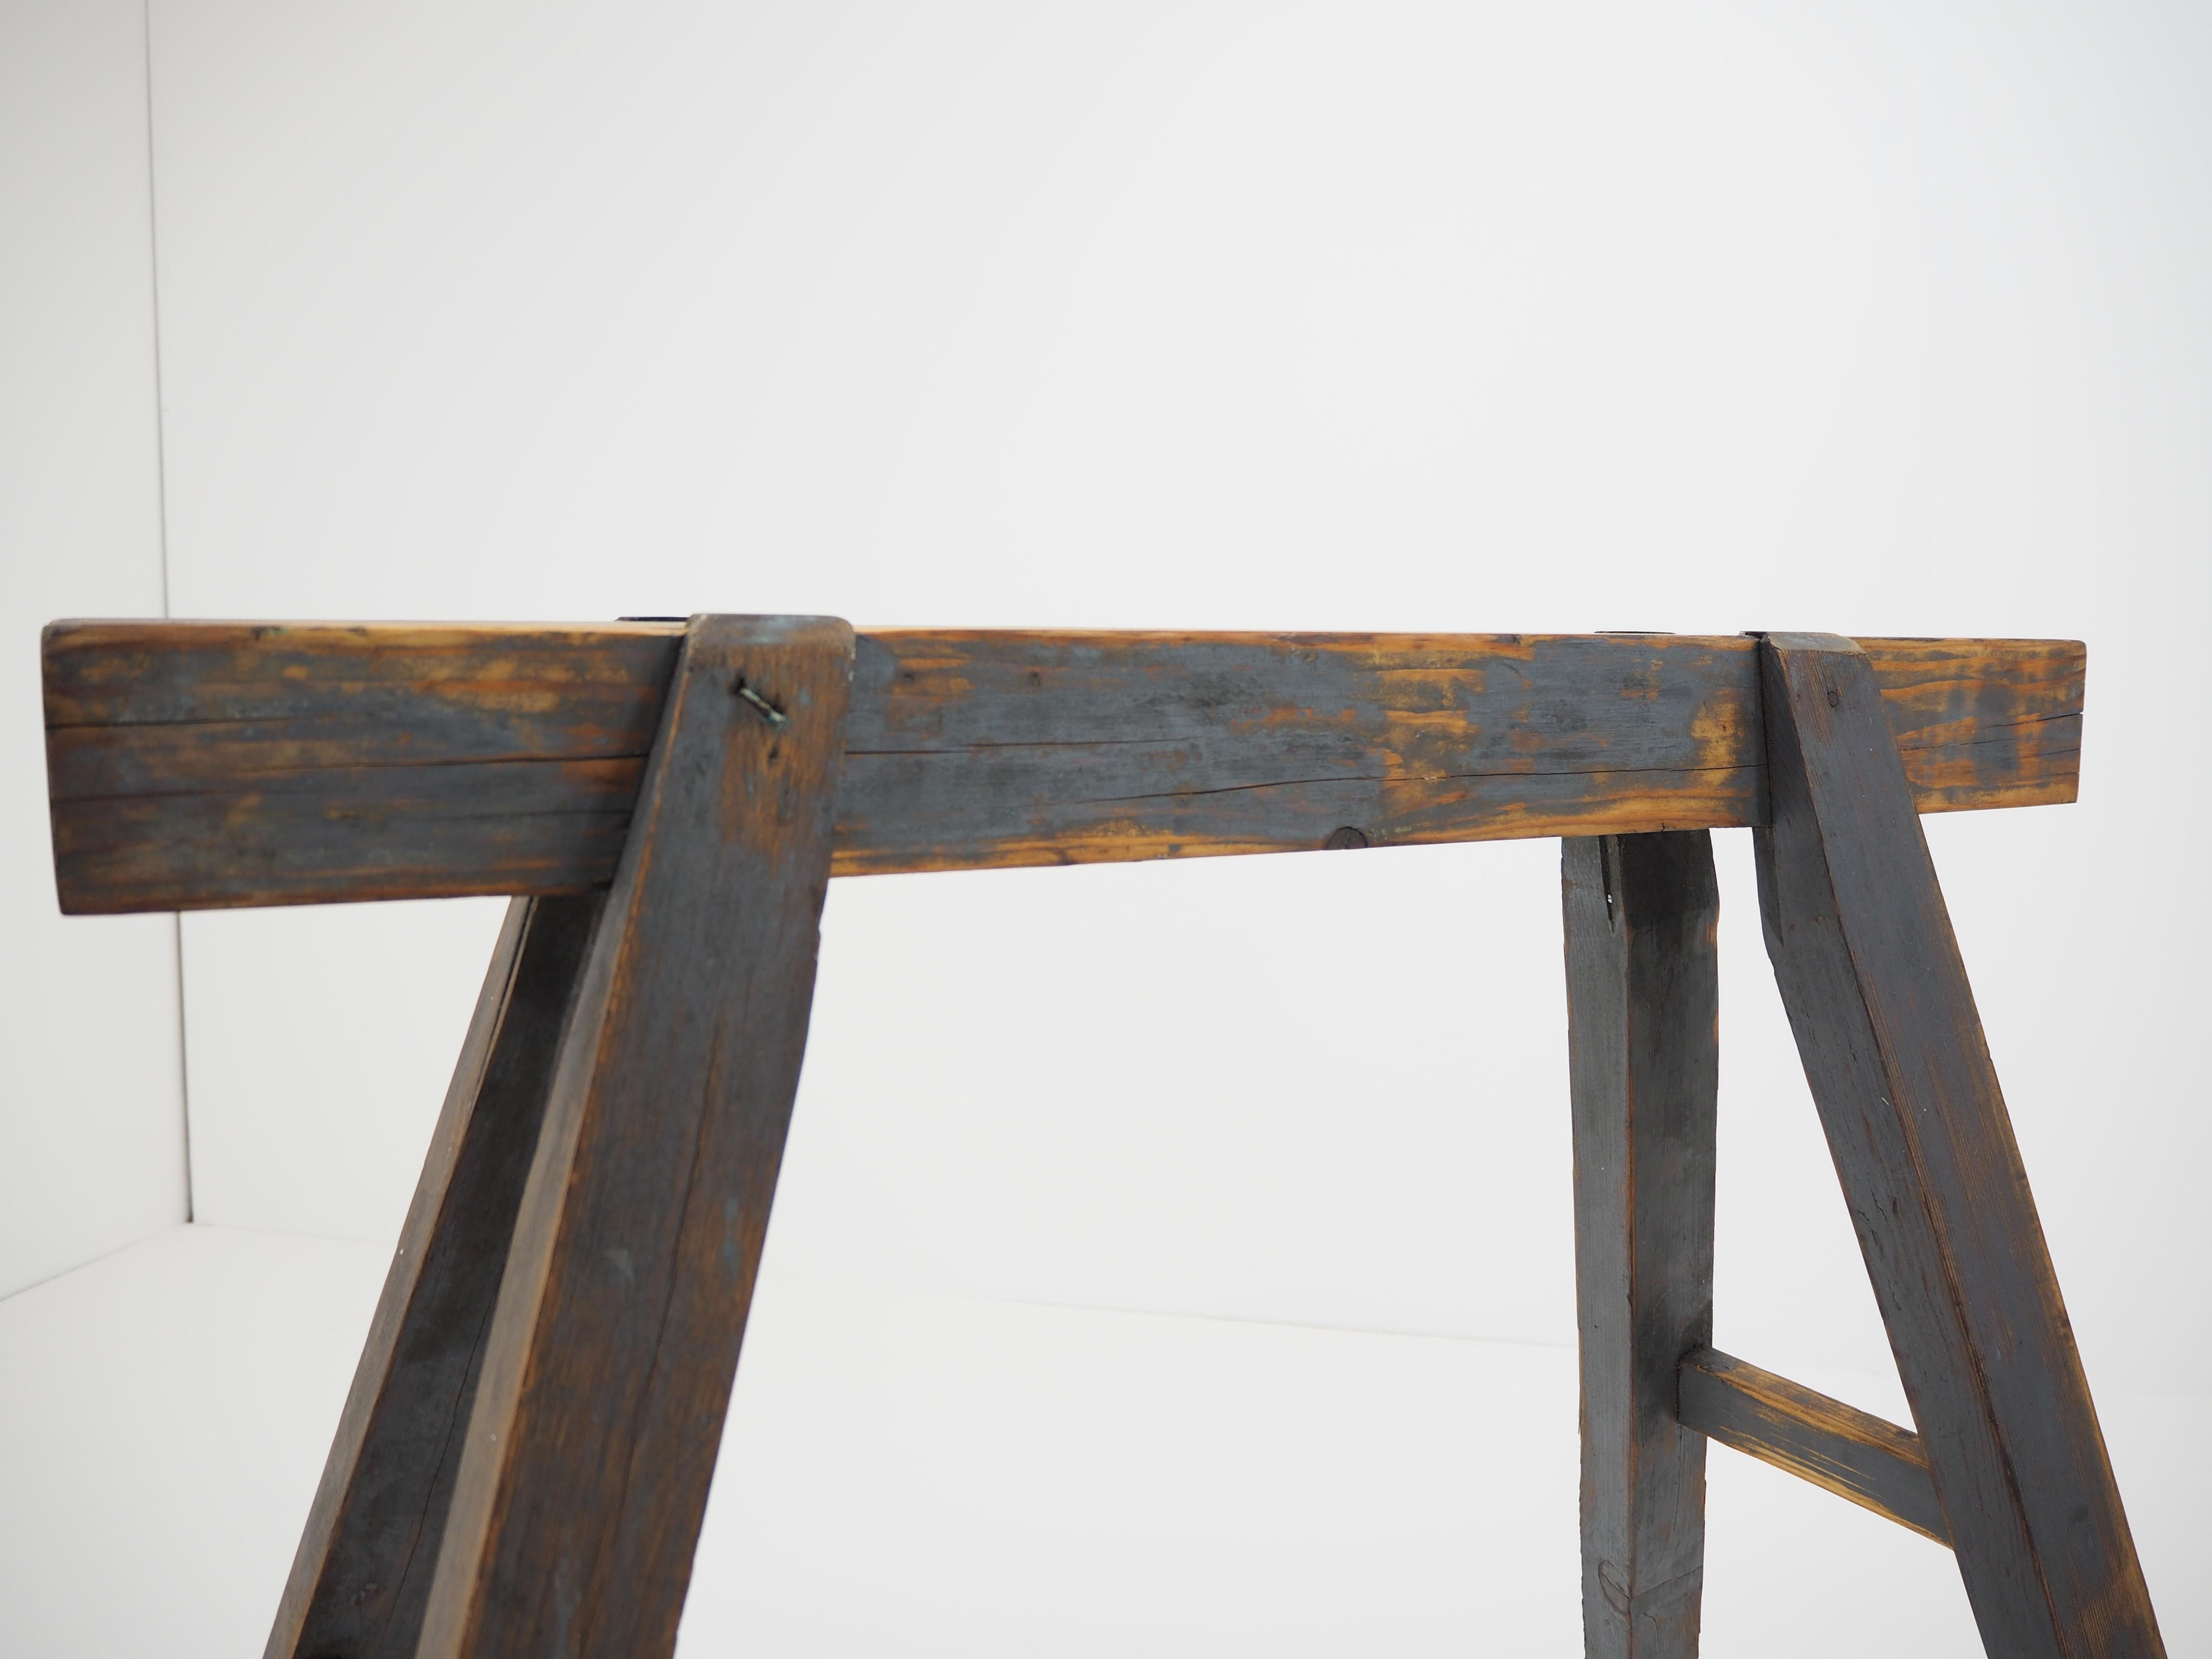 Wood Pair of Industrial Trestle Table Bases, Early 20th Century